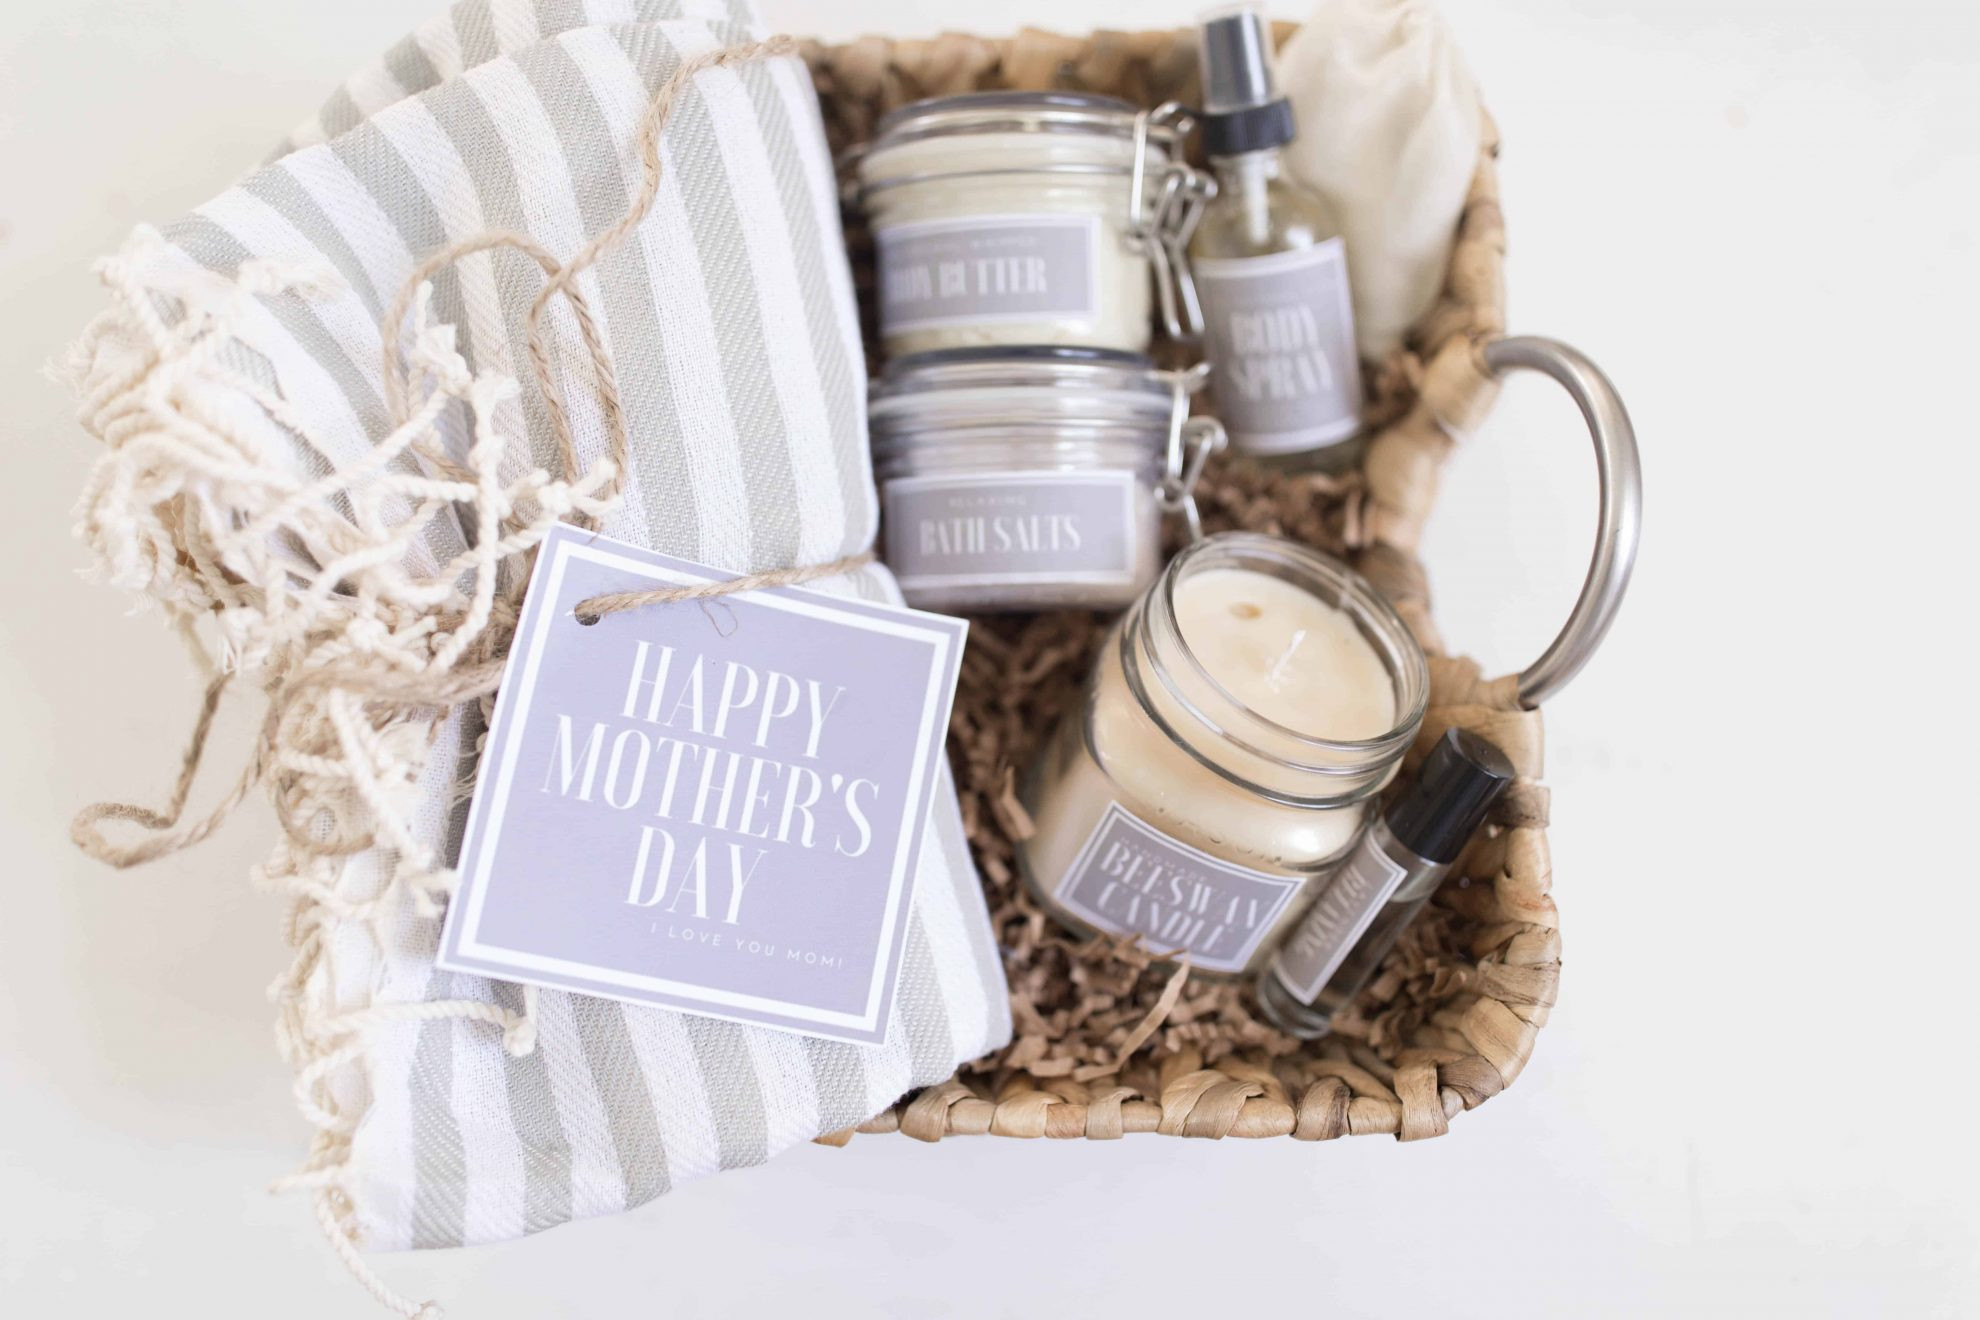 Homemade Gift Basket Ideas For Mom
 Handmade Mother s Day Gift Baskets with Free Printable